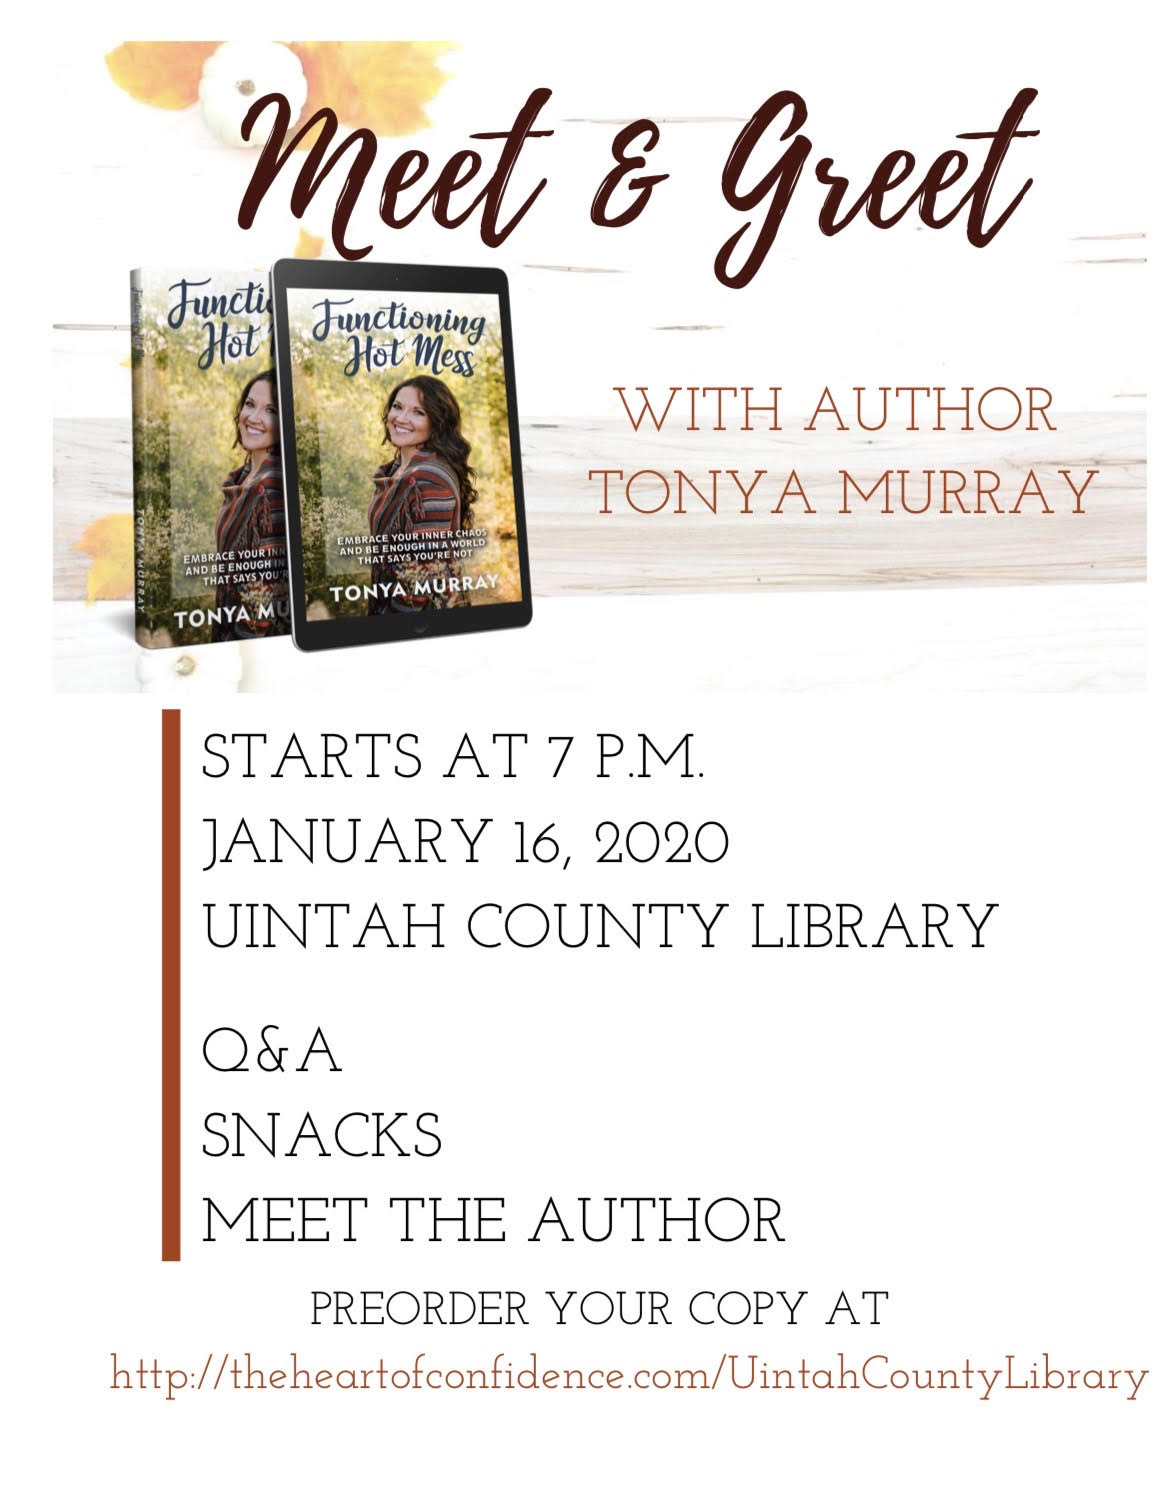 Meet & Greet with author Tonya Murray starts at 7 p.m. January 16, 2020 at Uintah County Library. Q&A, snacks, meet the author. Preorder your copy at http://theheartofconfidence.com/uintahcountylibrary